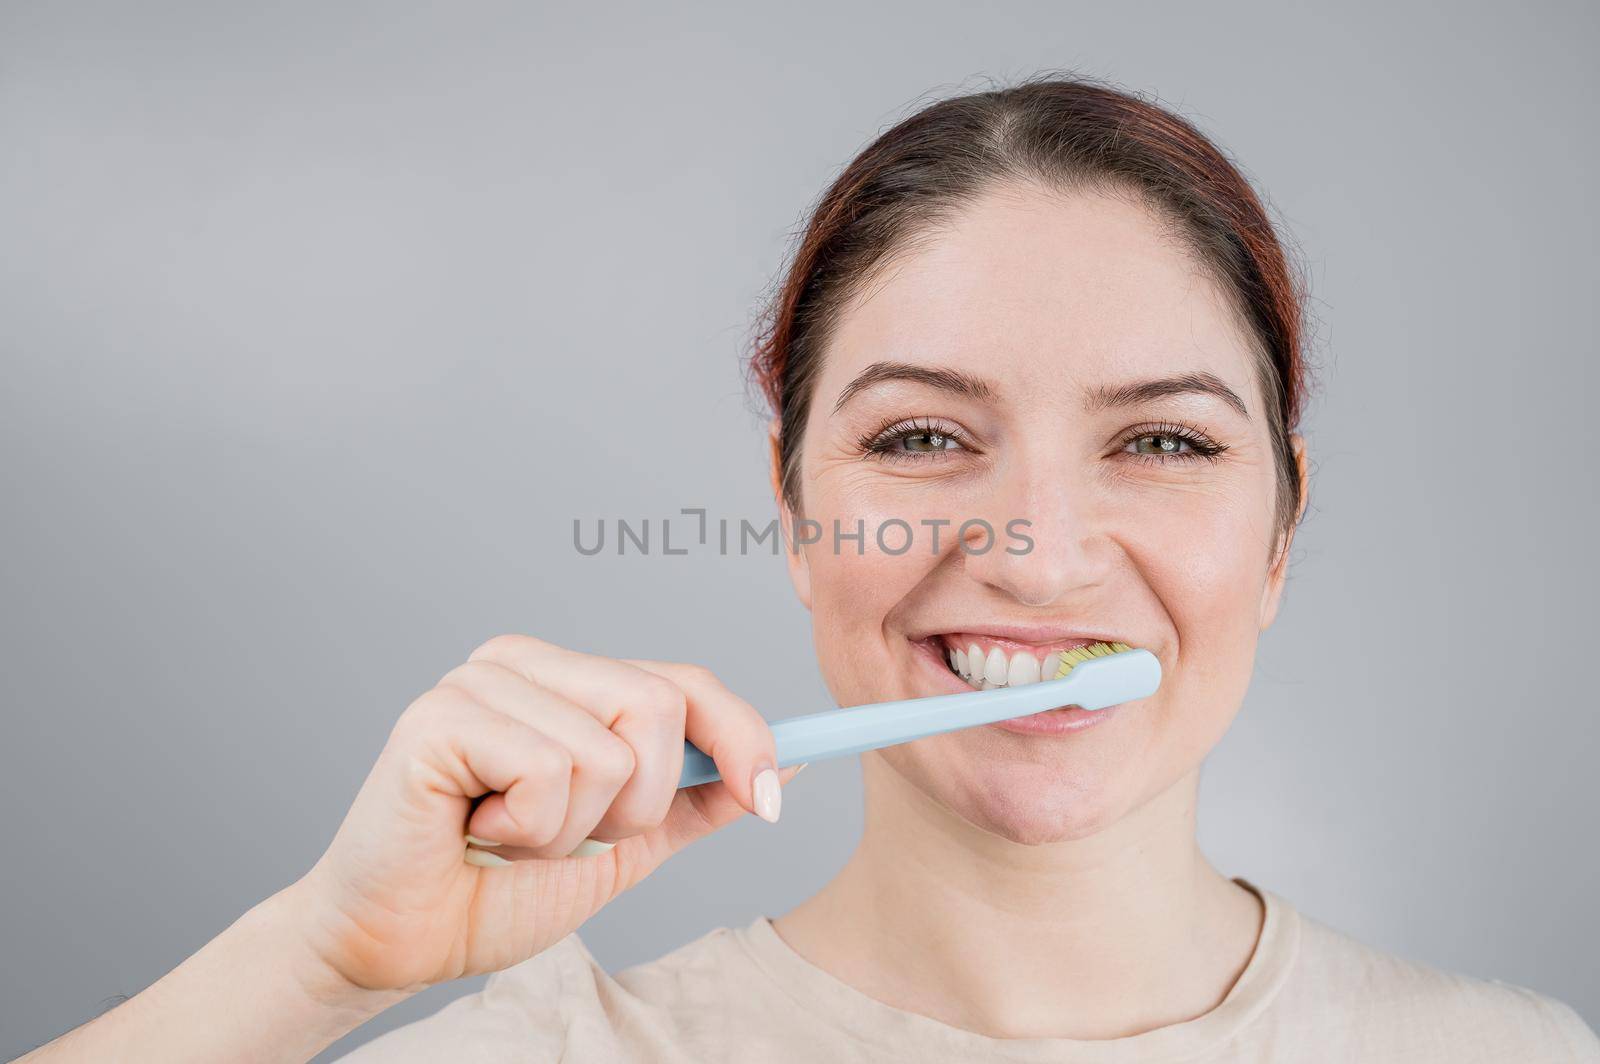 Close-up portrait of caucasian woman brushing her teeth. The girl performs the morning oral hygiene procedure by mrwed54